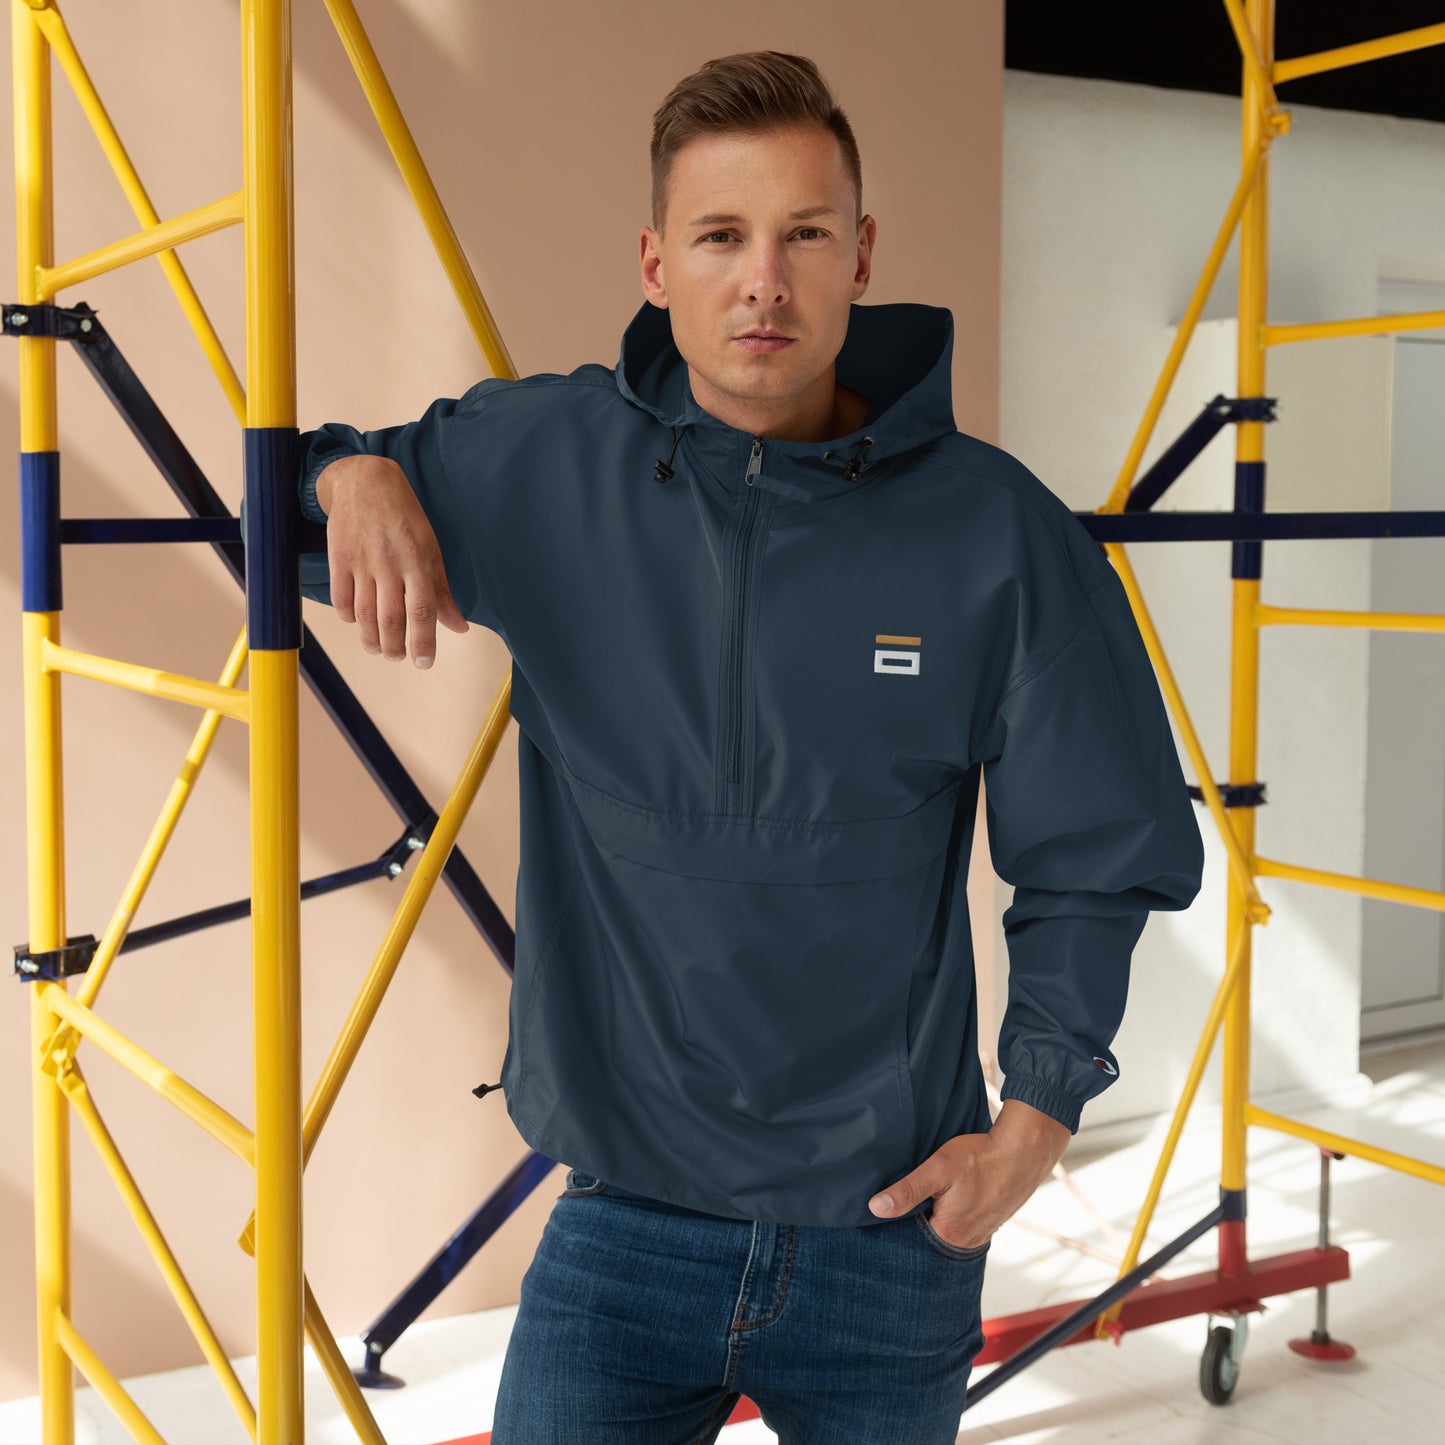 Embroidered Champion Packable Jacket Navy - Alpha Clothing